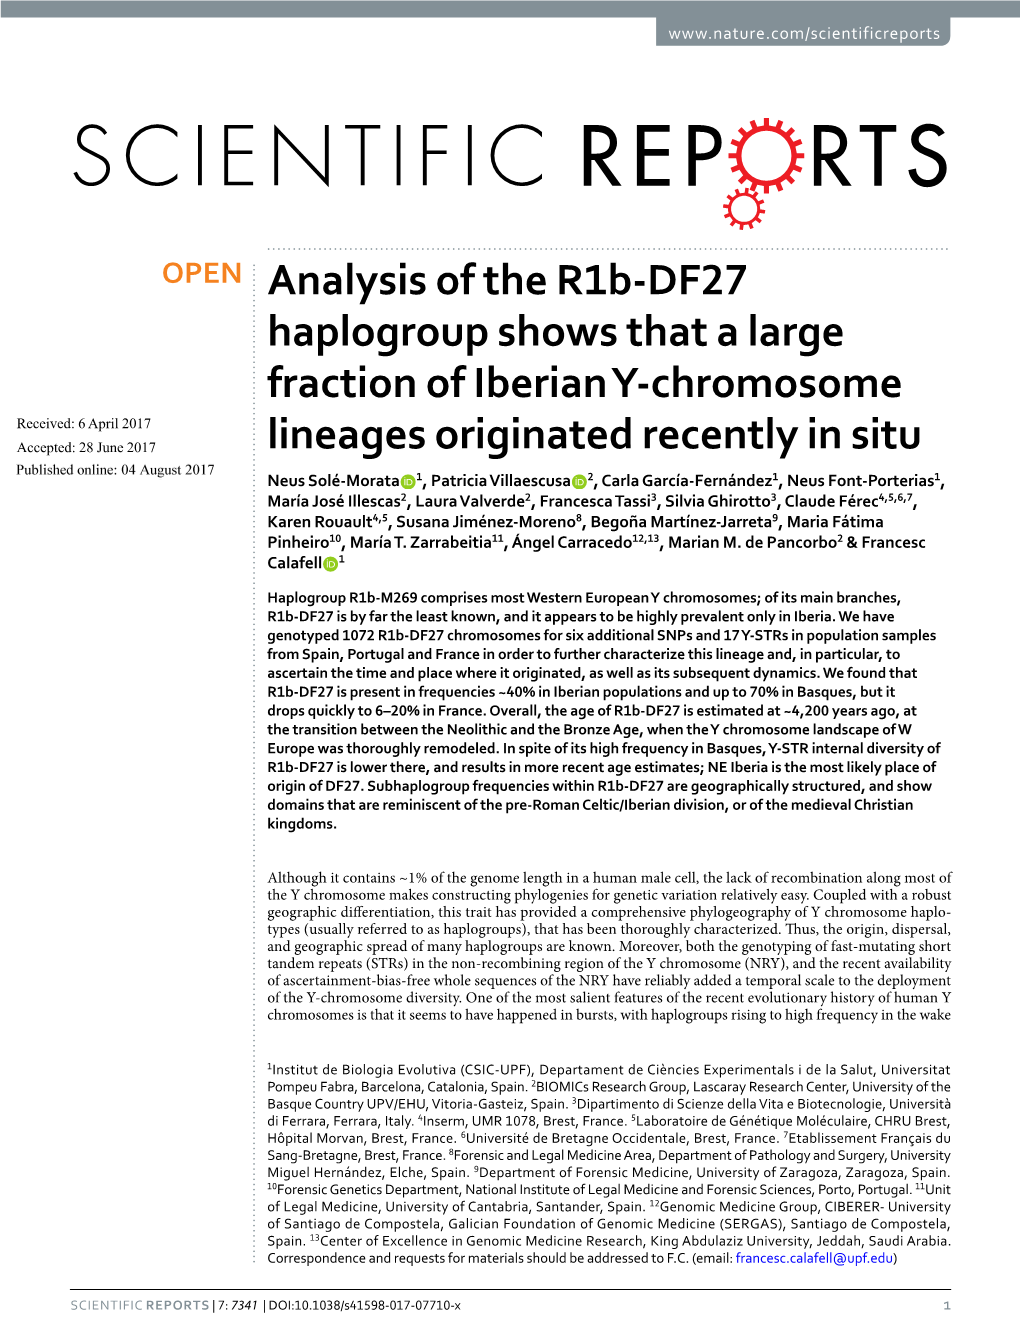 Analysis of the R1b-DF27 Haplogroup Shows That a Large Fraction